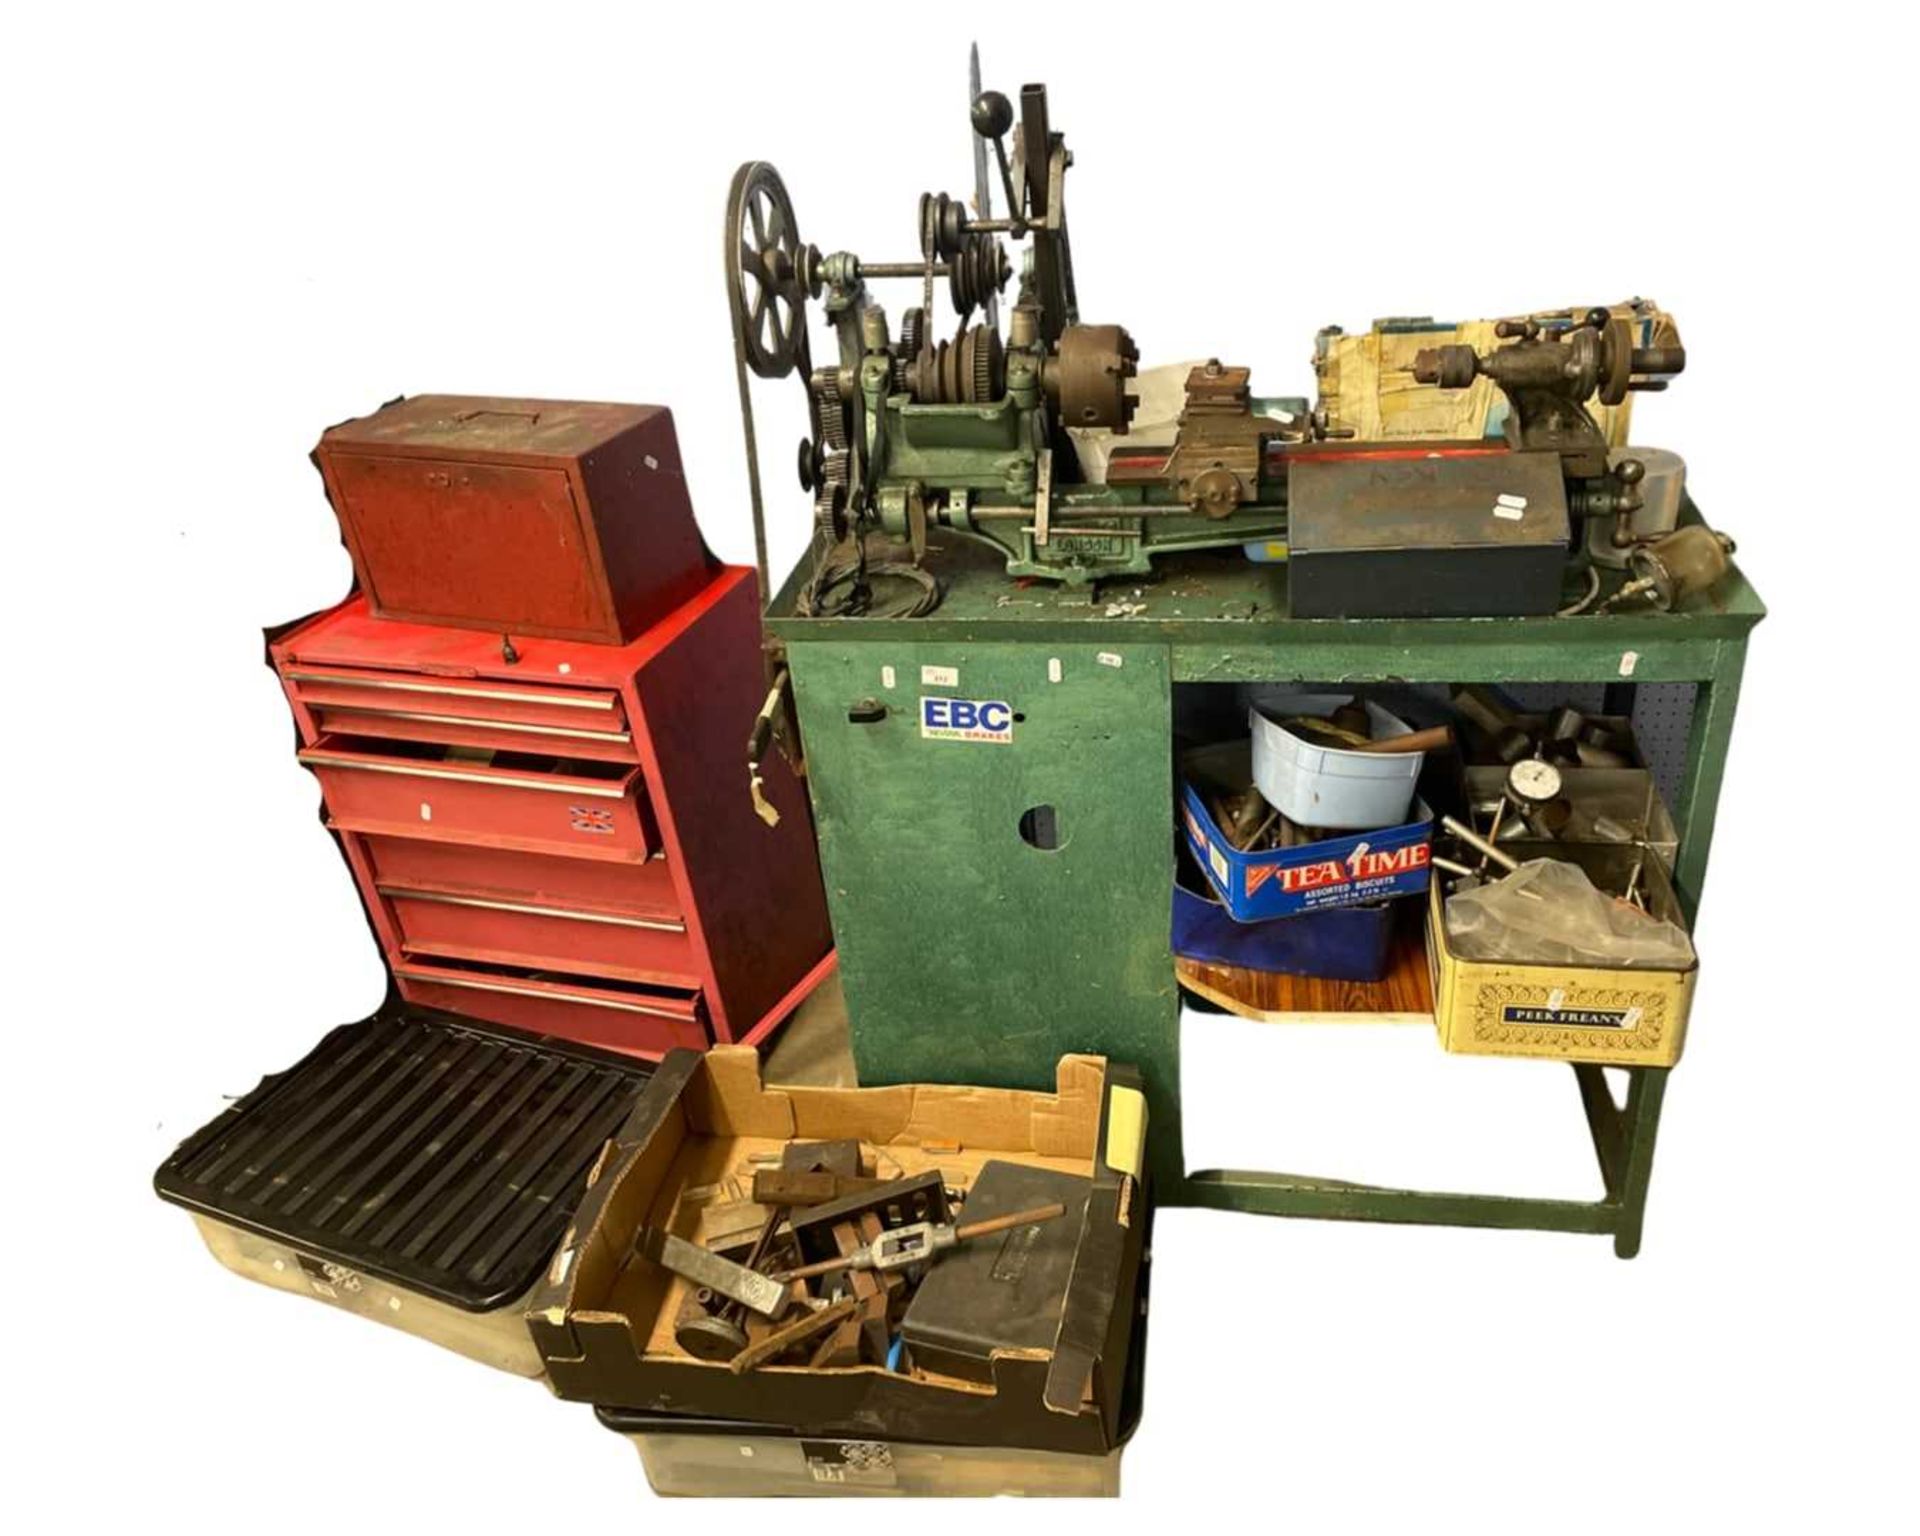 Vintage belt driven lathe by Gamages of London together with a workshop toolbox including all